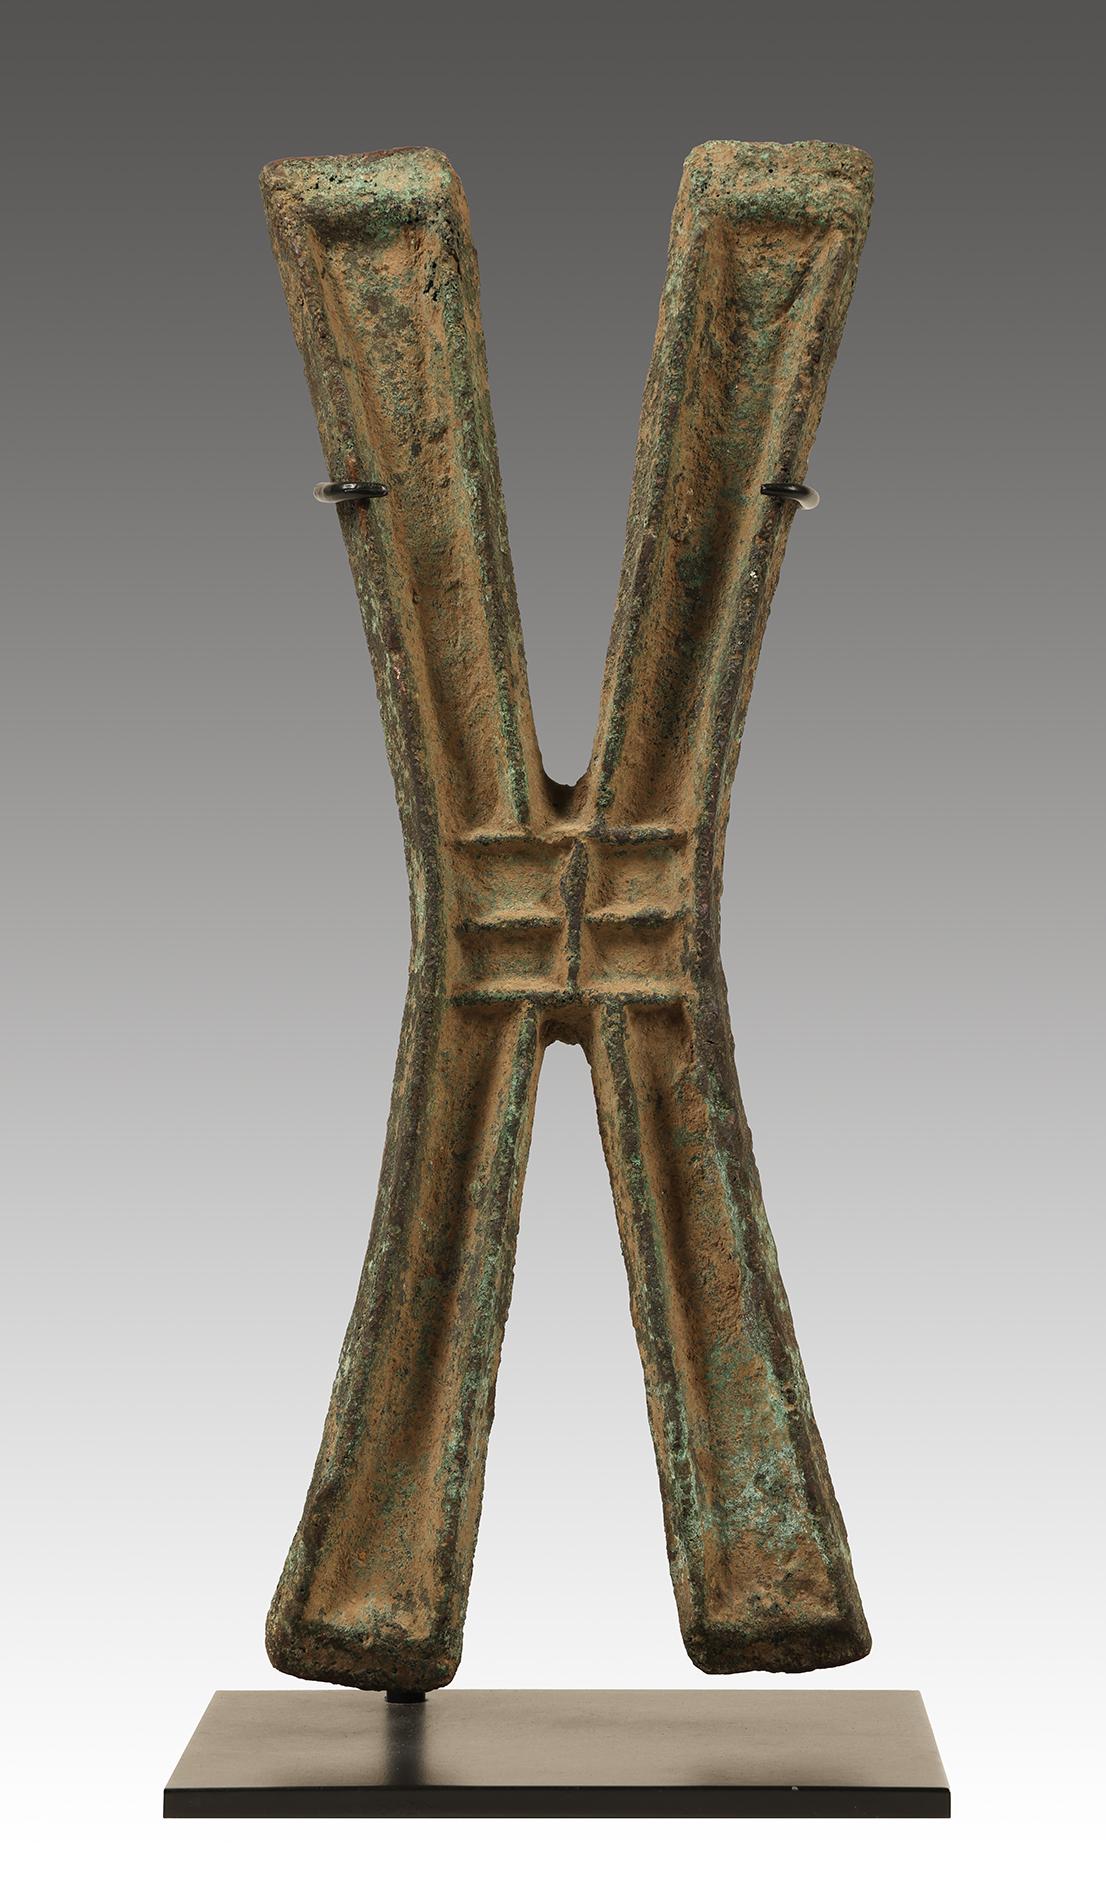 
A Pair of Copper Currencies: “Katanga Crosses”
Central African Copper Belt (DR Congo, Zambia or Zimbabwe)
Cast copper, archaeological patina
Size each: 12” high x 5” wide x 1/2” deep (30.5 x 12.5 x 1.5 cm)

Displayed on custom-made metal bases, as